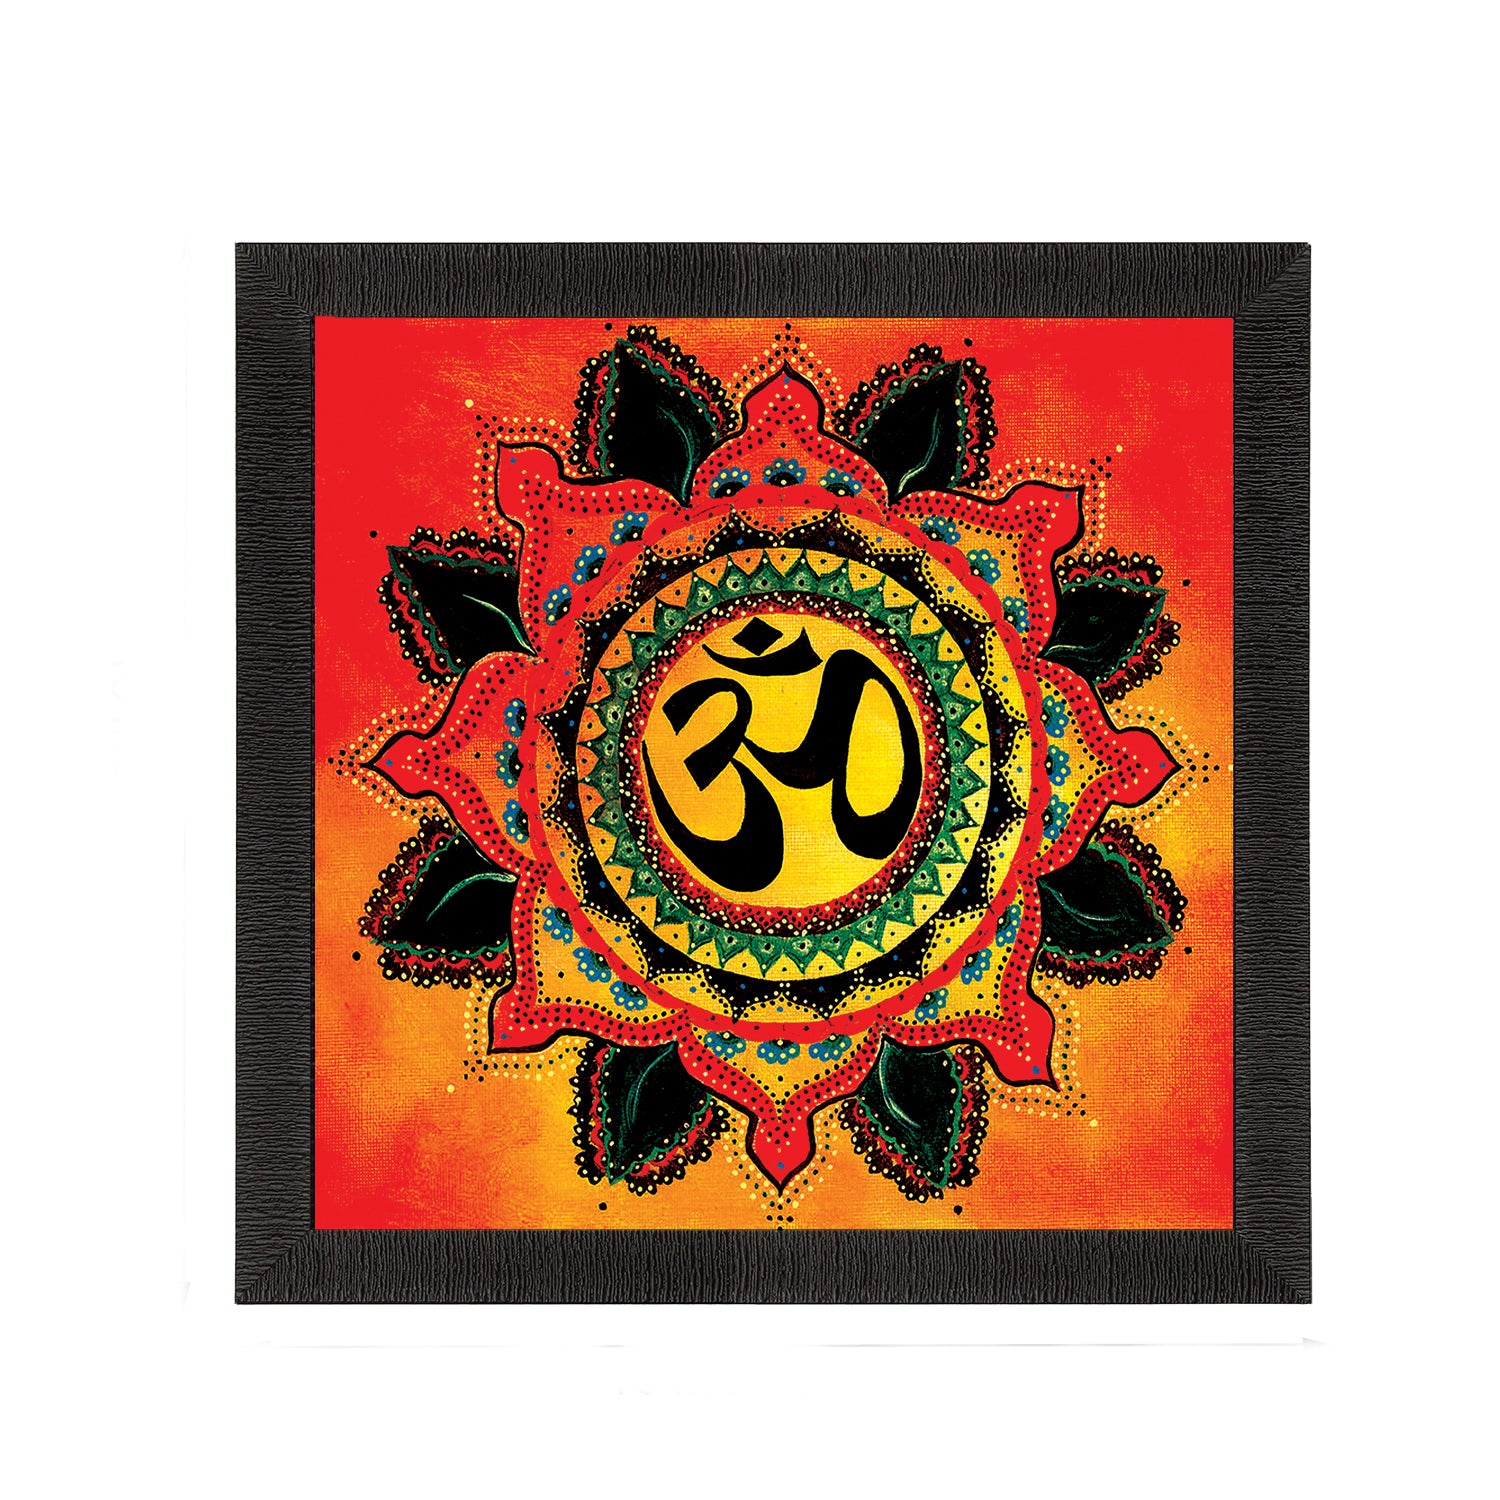 Holy Om Painting Digital Printed Religious Wall Art